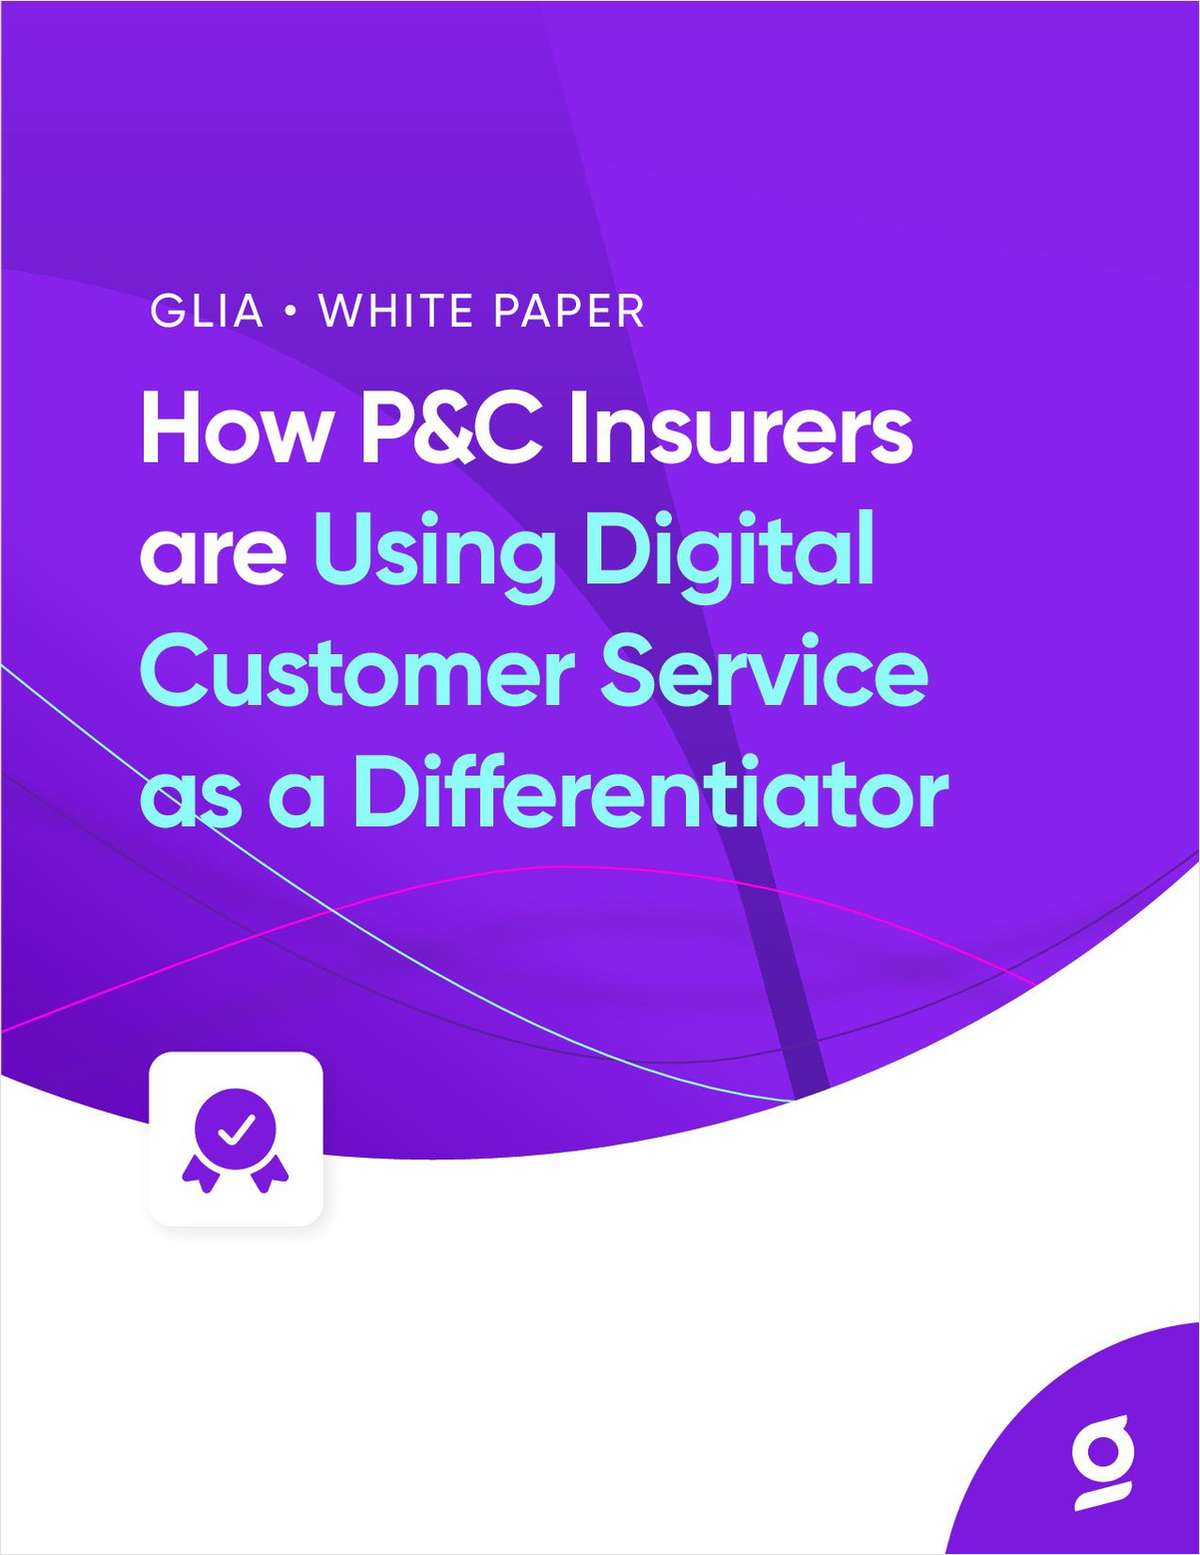 How P&C Insurers are Using Digital Customer Service as a Differentiator